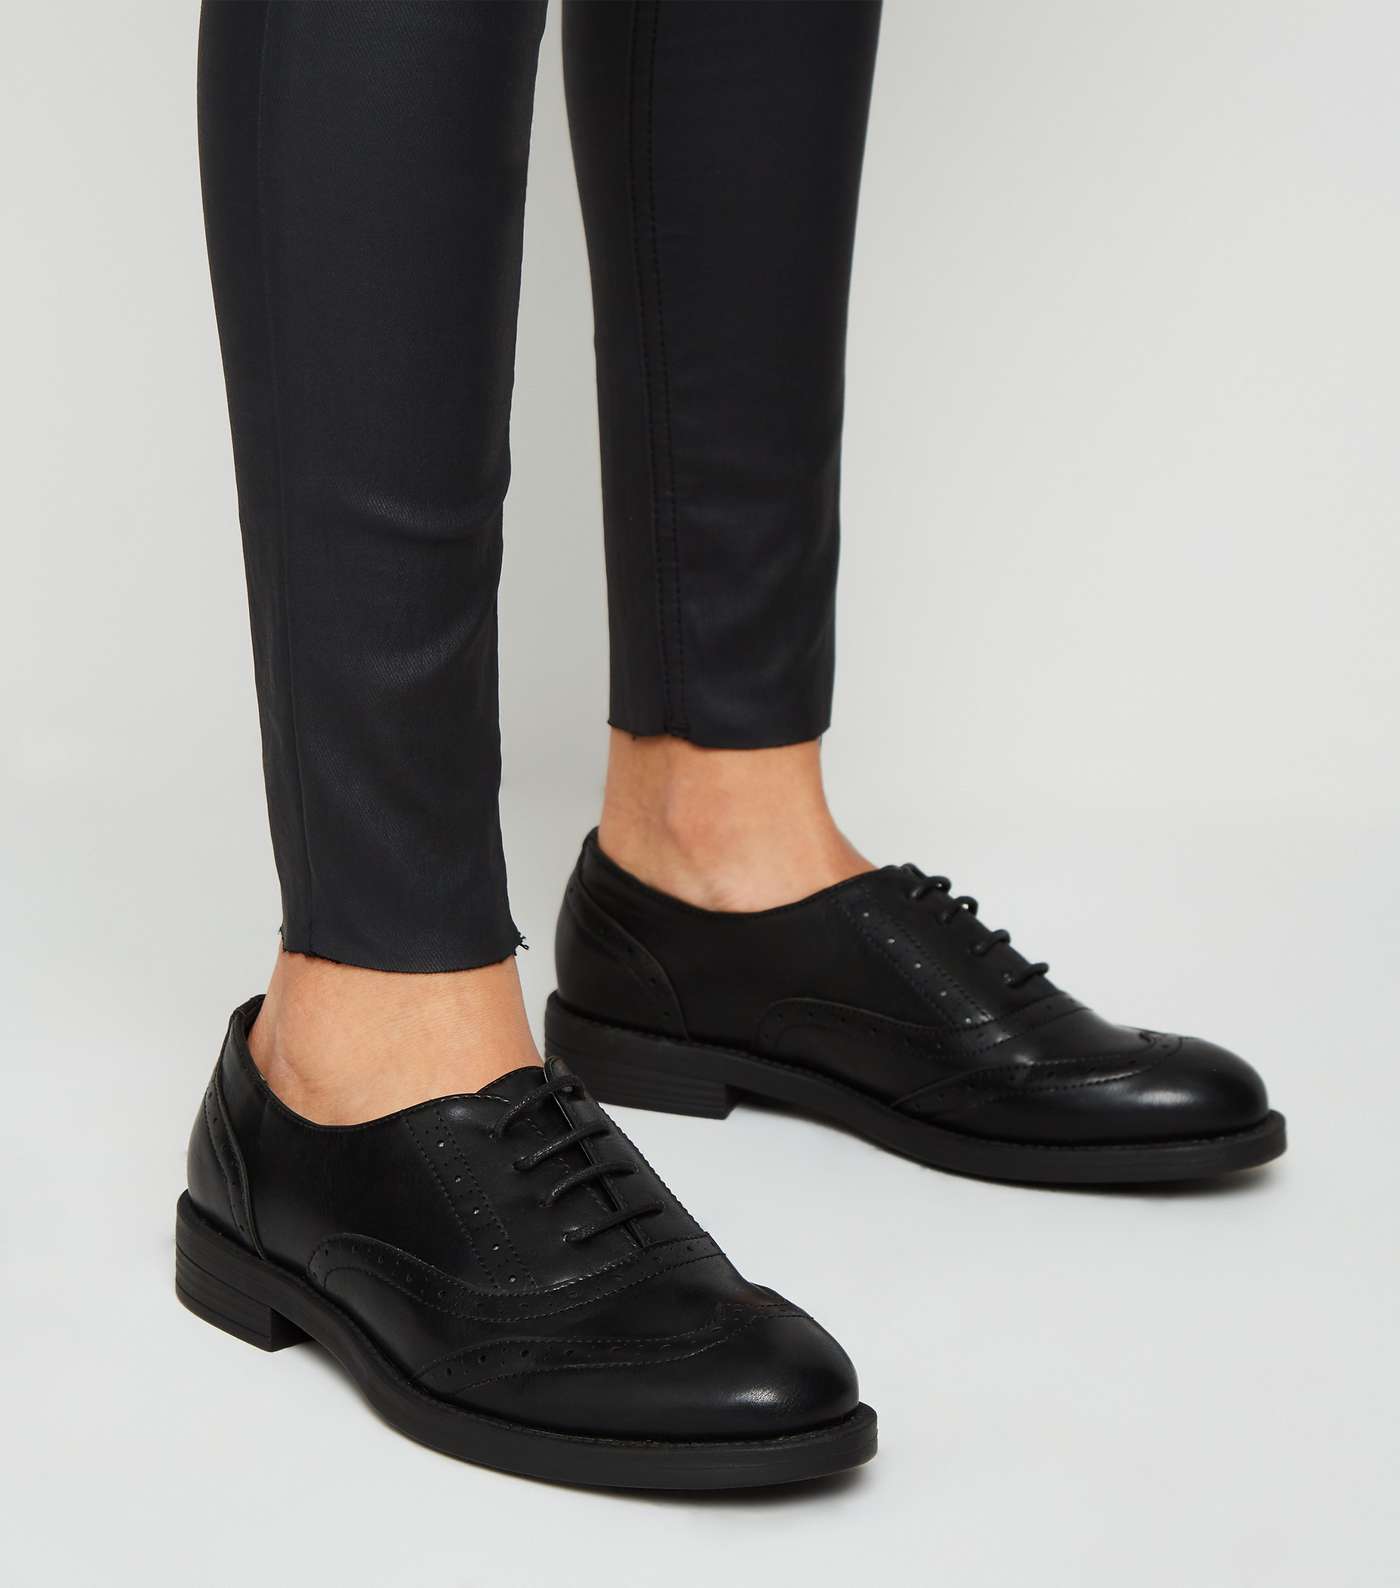 Girls Black Leather-Look Brogues Image 2